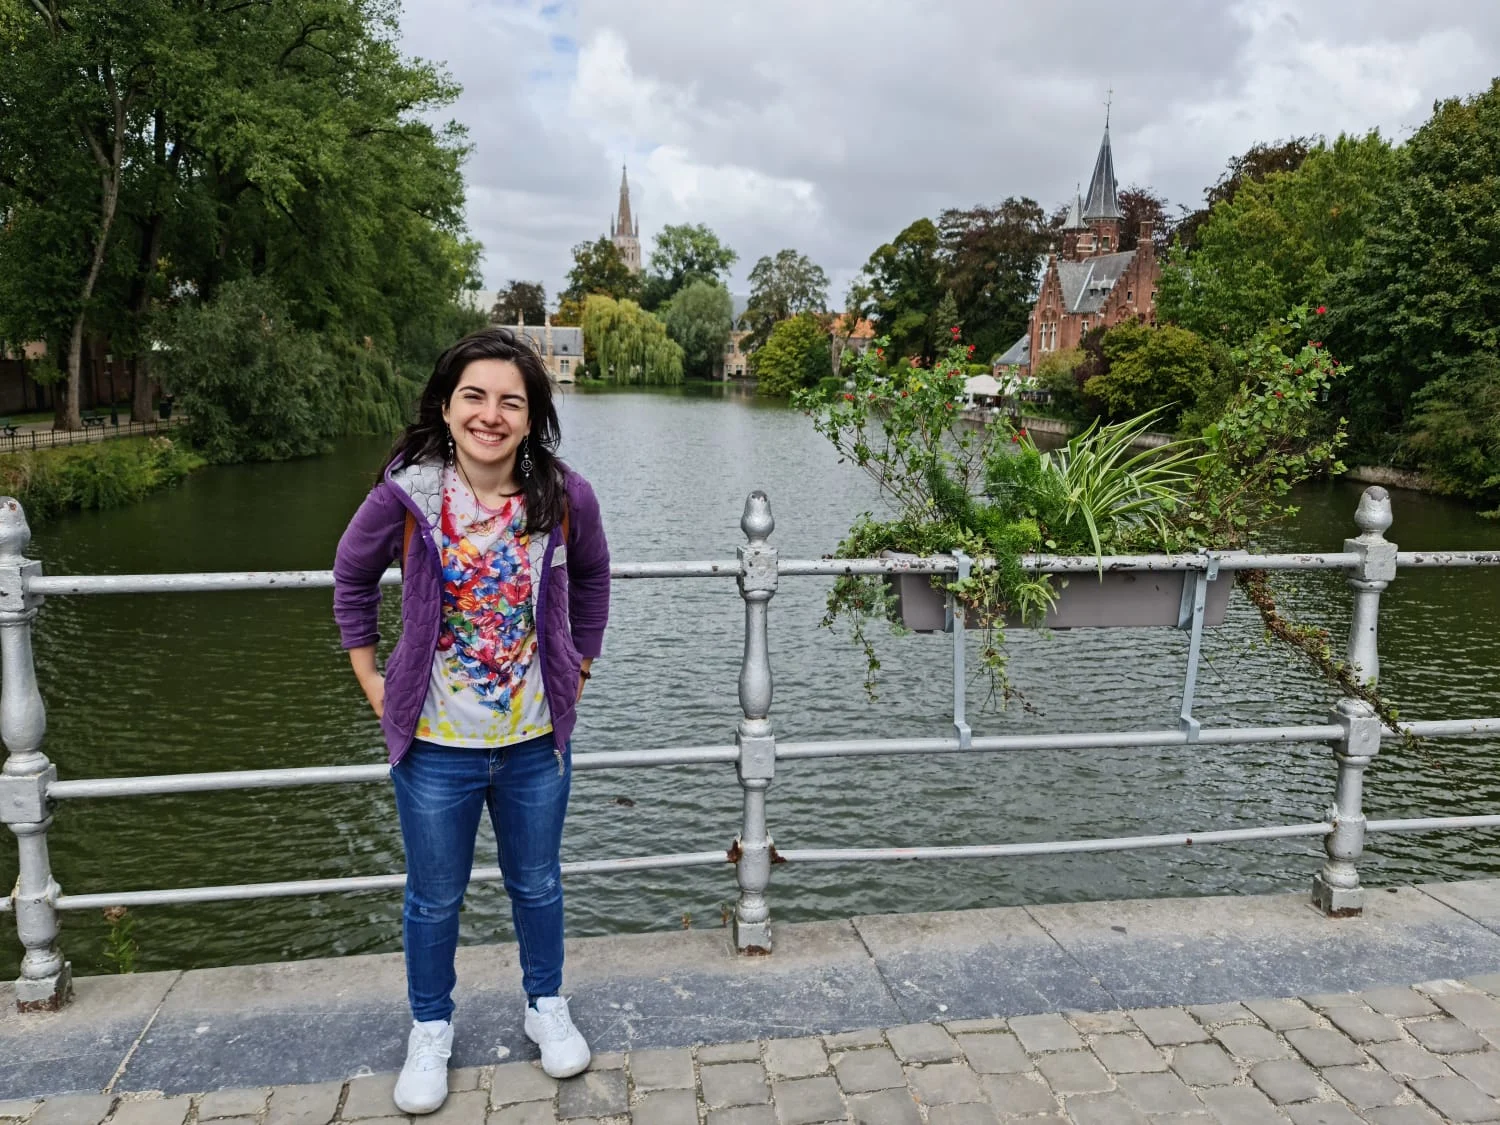 Rosa stands in front of a canal